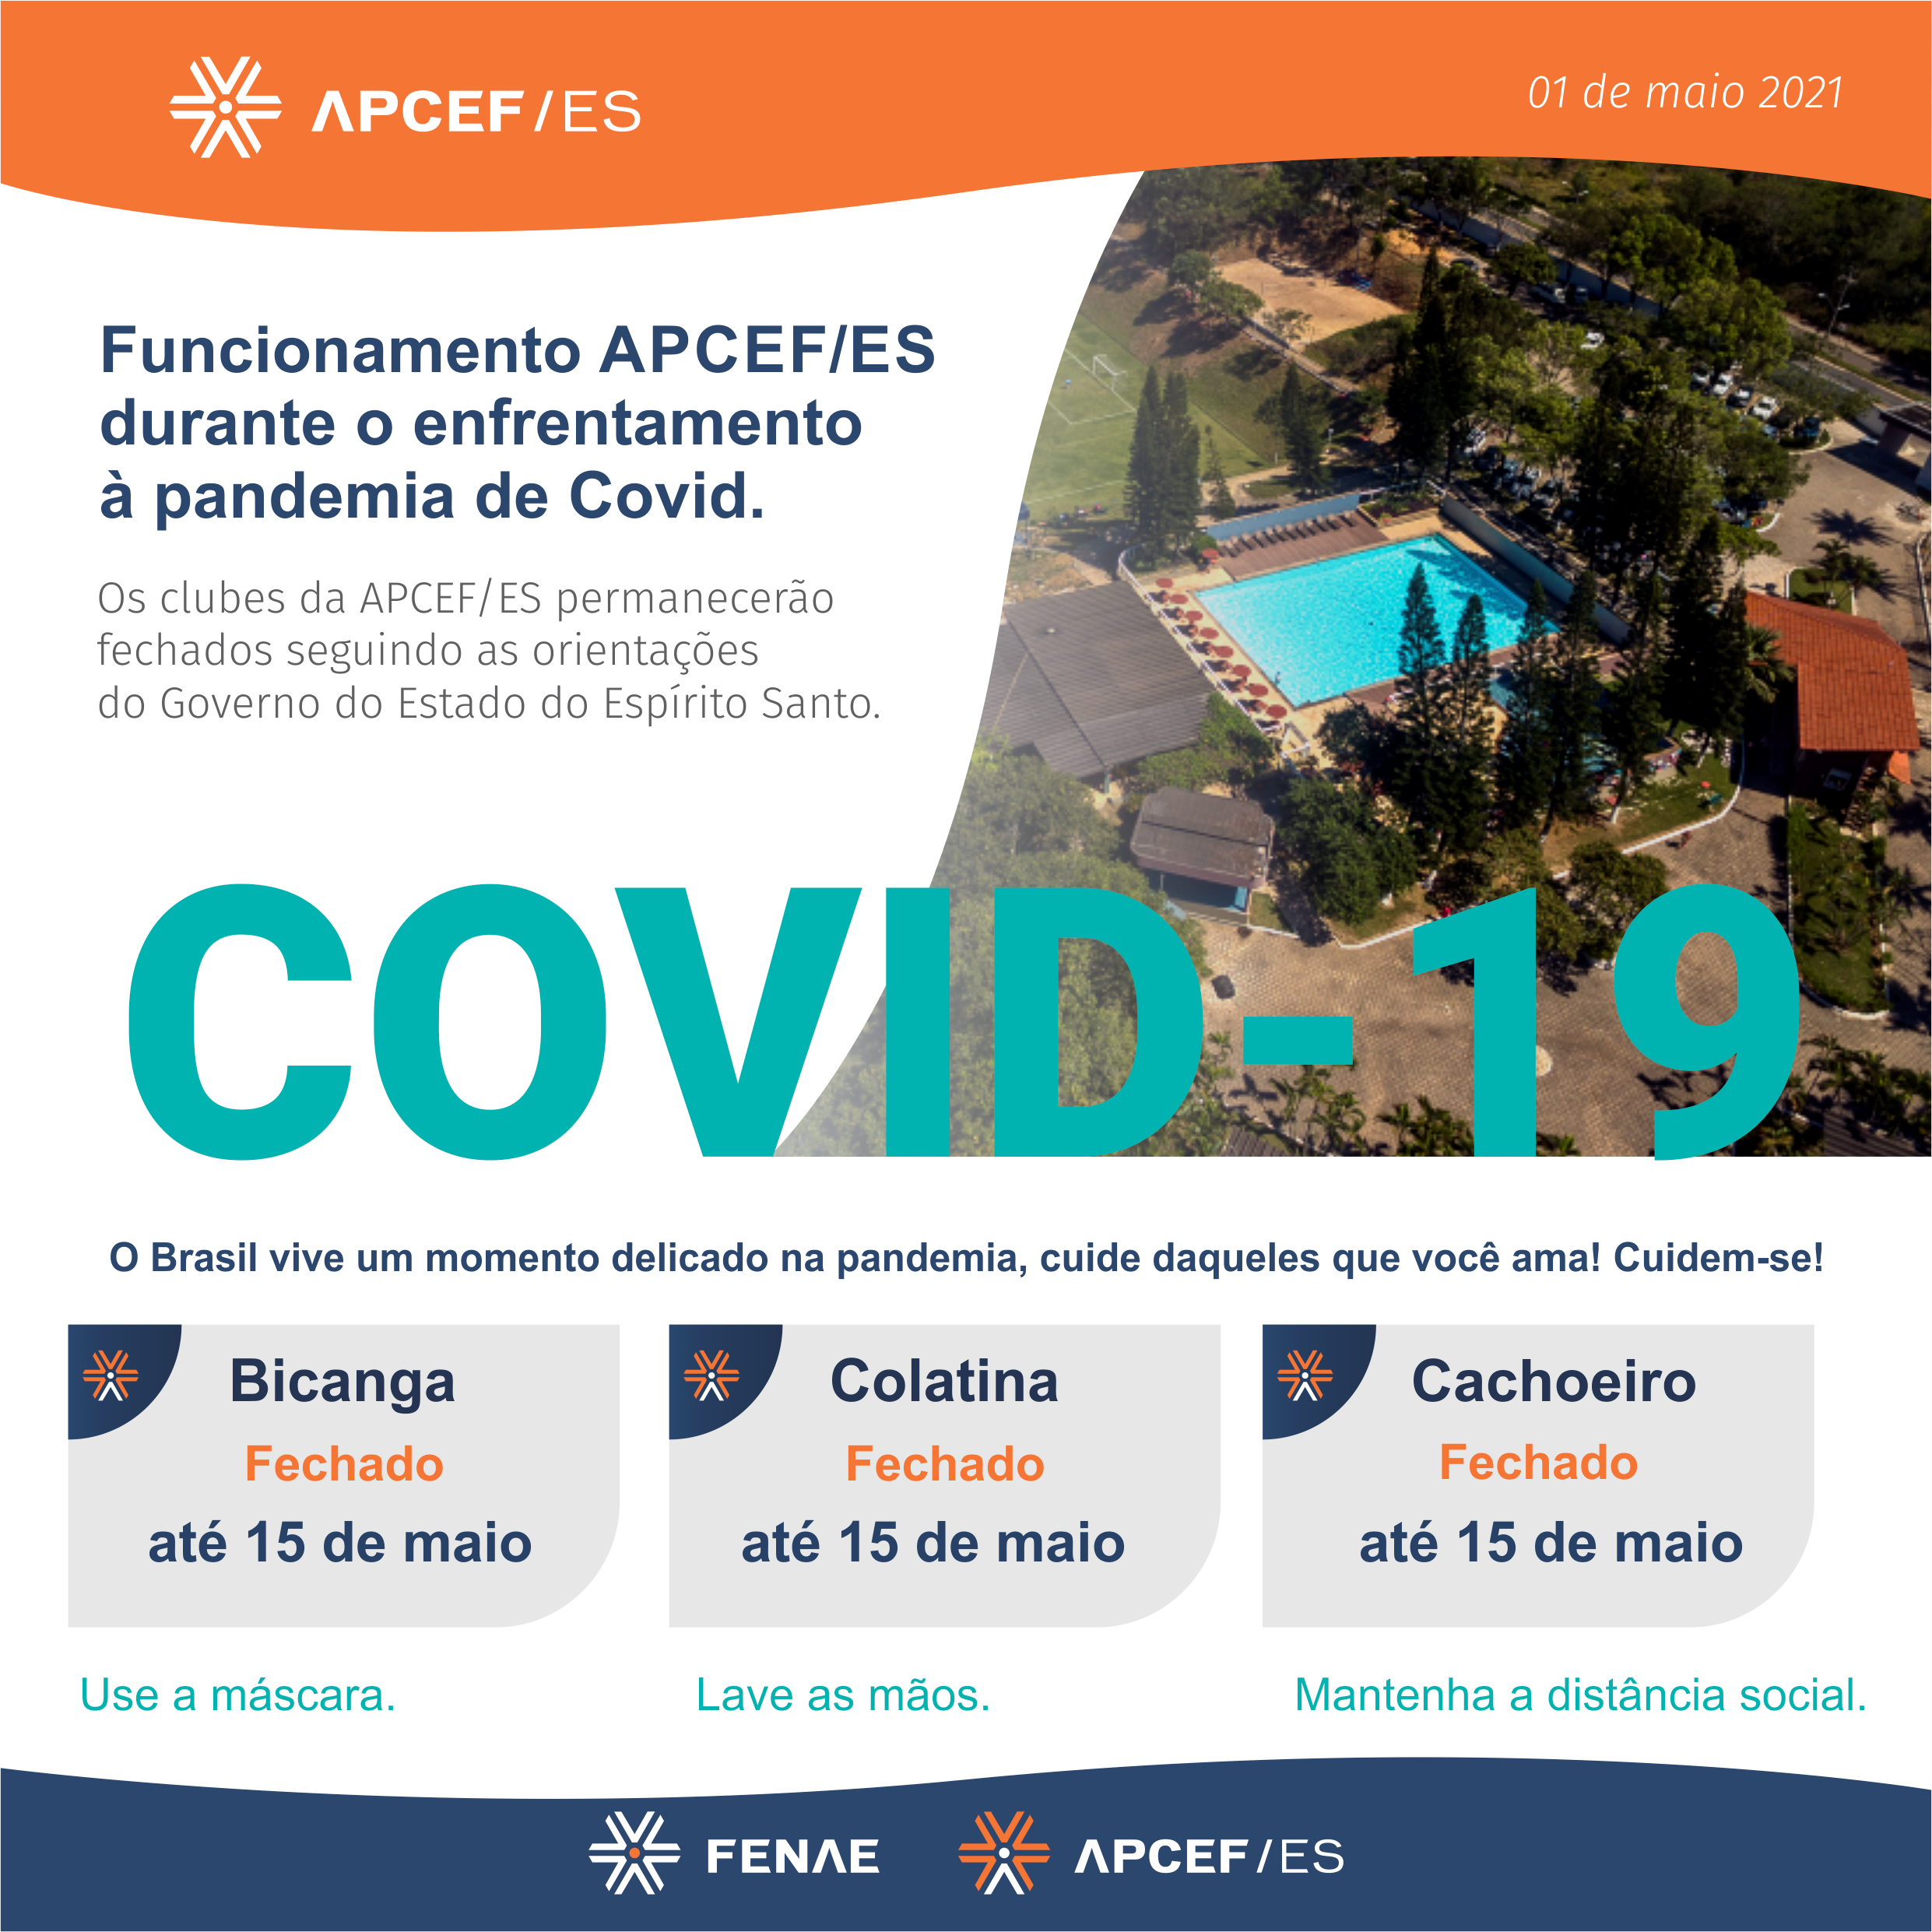 APCEFES Covid - 1maio21.png